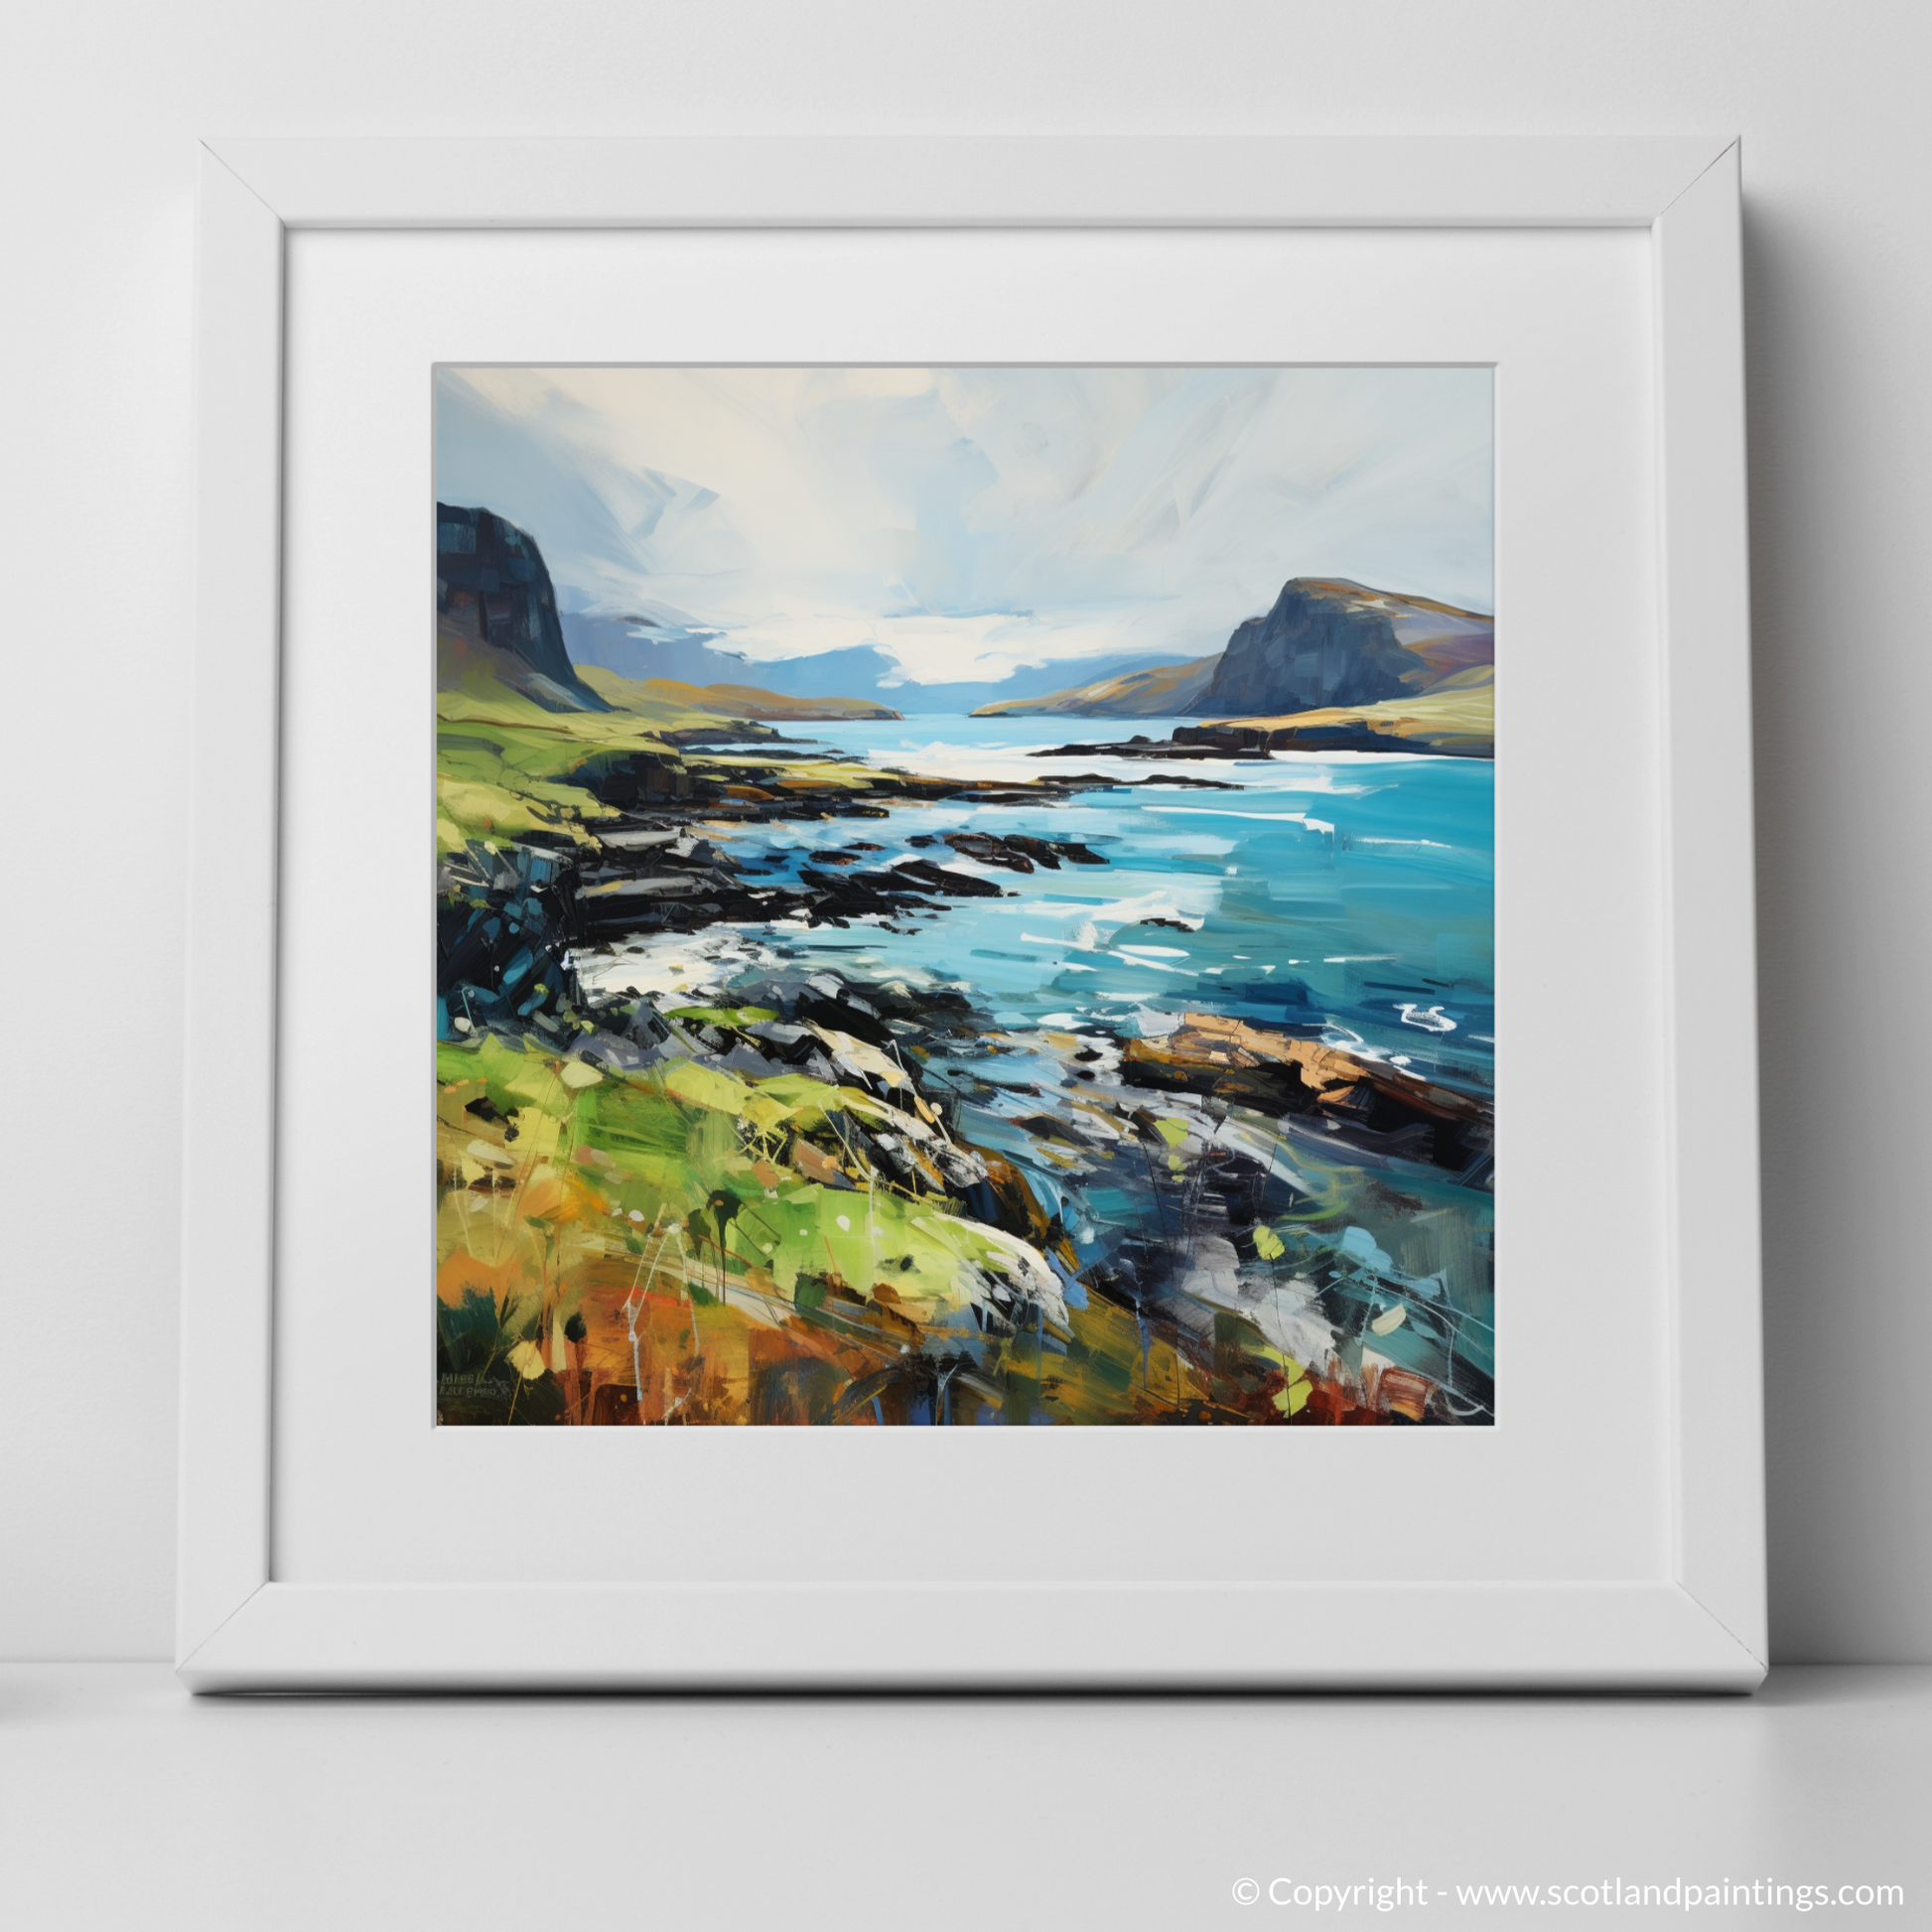 Art Print of Ardtun Bay, Isle of Mull with a white frame